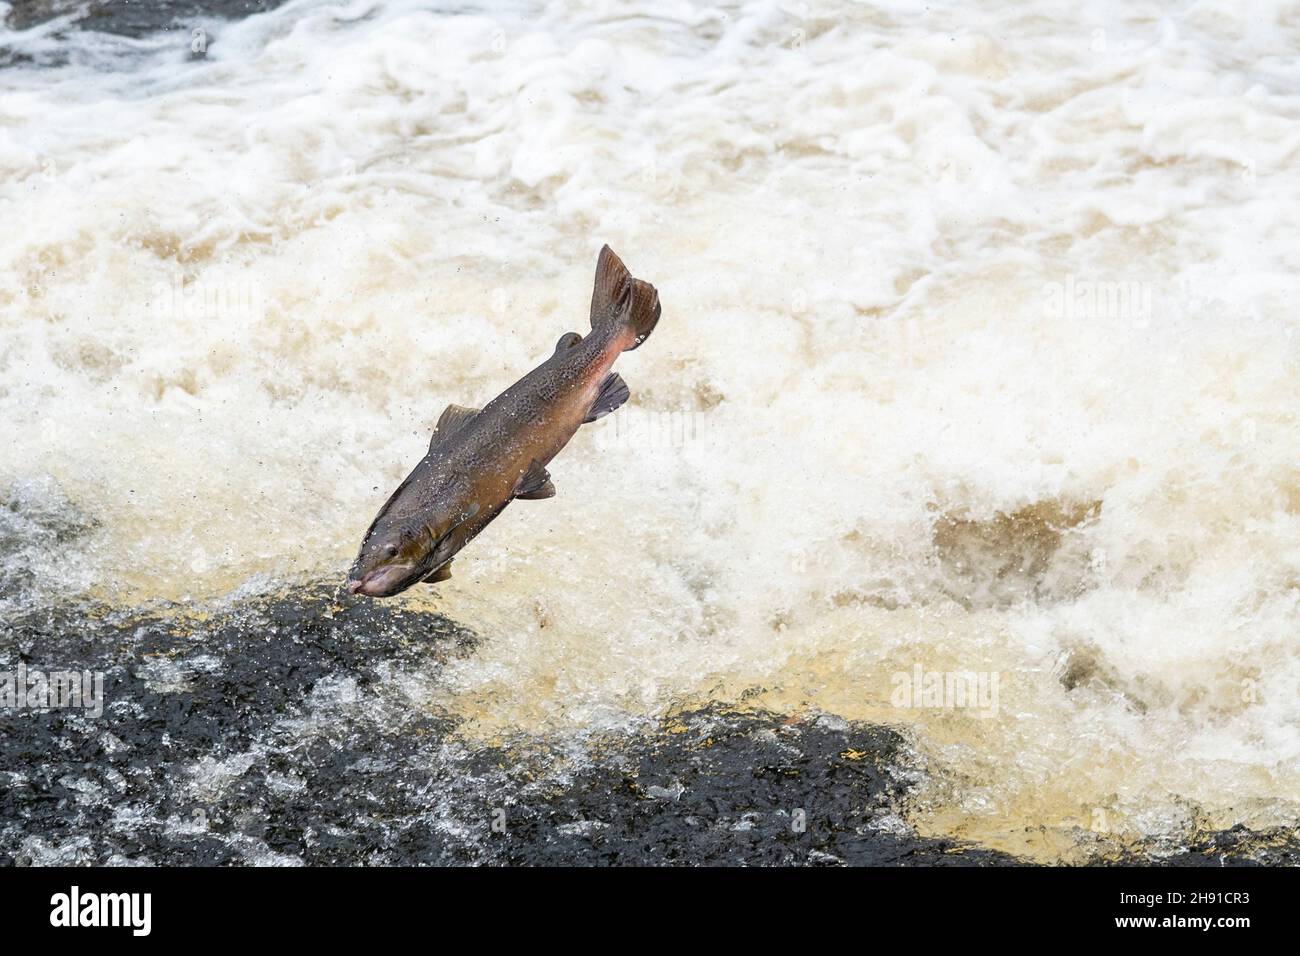 Salmon jumping at a weir on the River Tawe Stock Photo